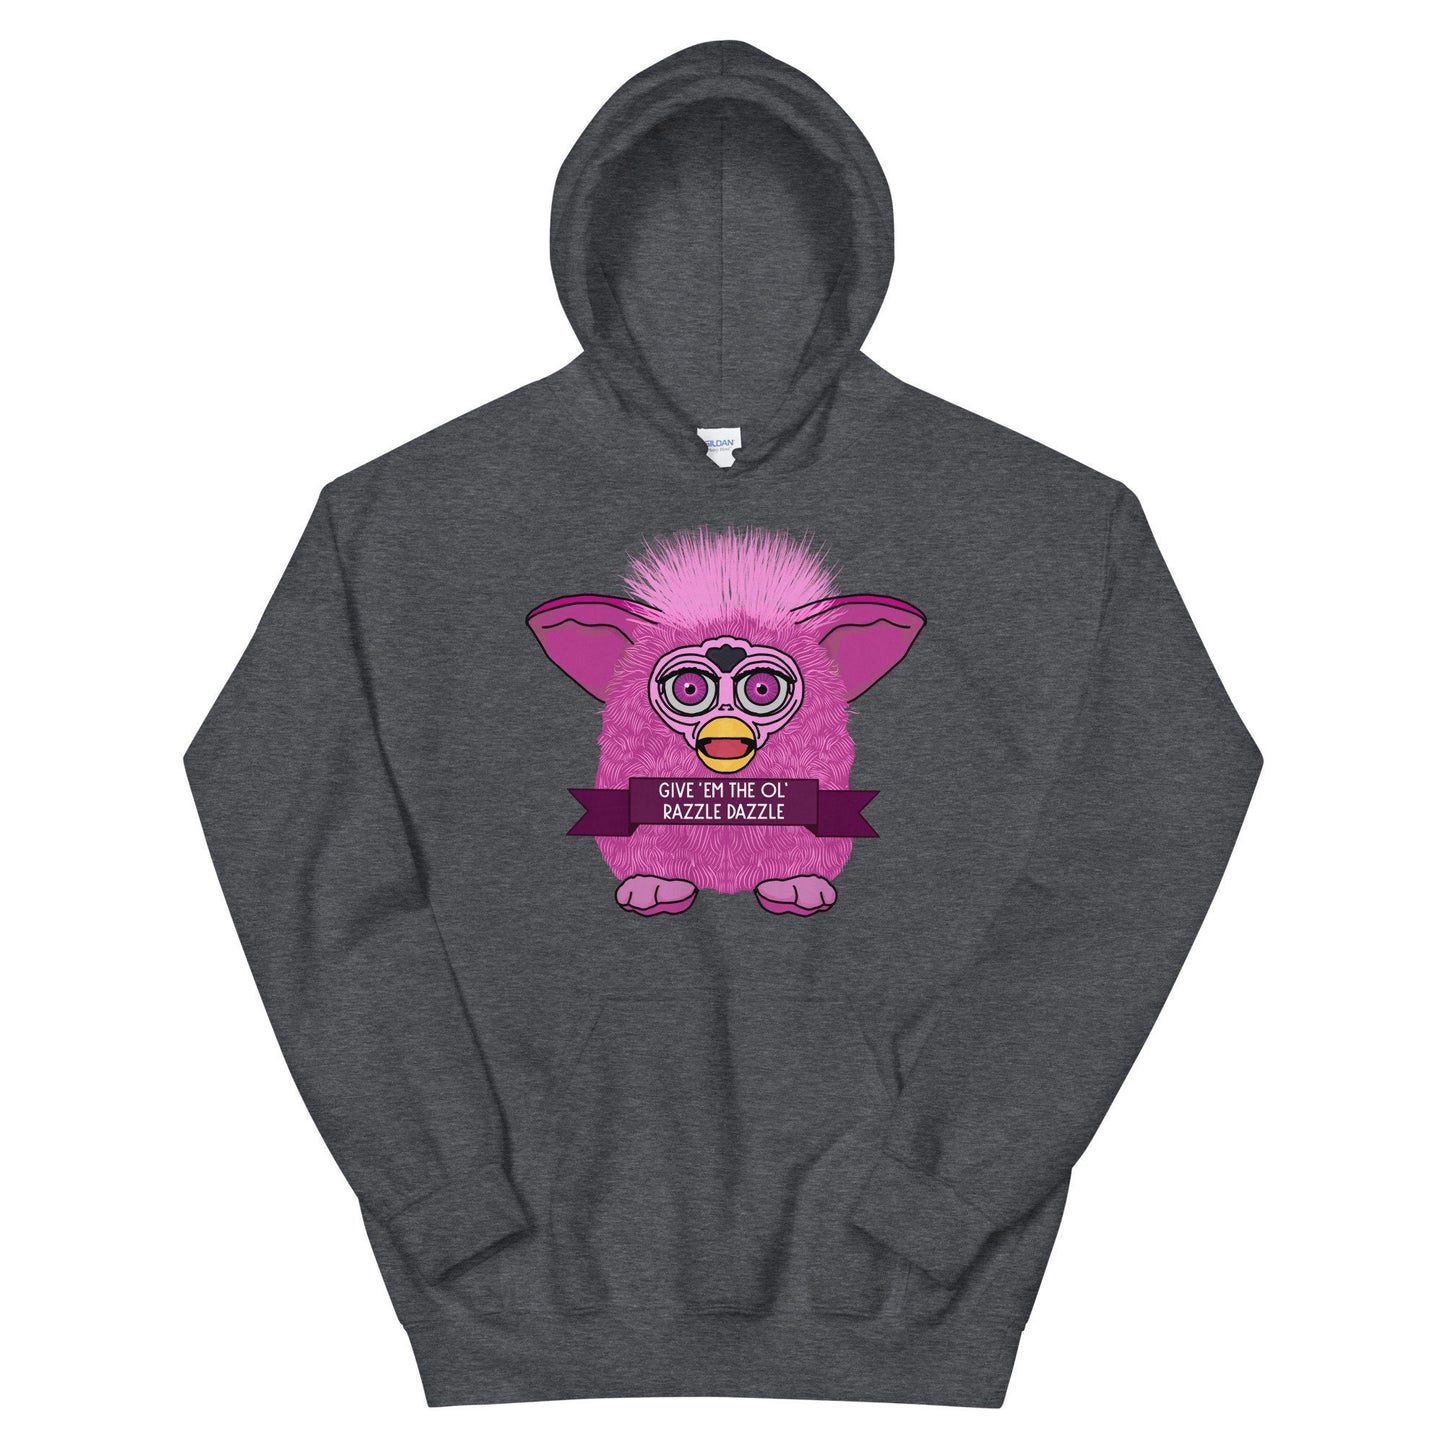 Furby toy, Furby hoodie, Furby Face, Chicago Tee, Razzle Dazzle, the weird emporium